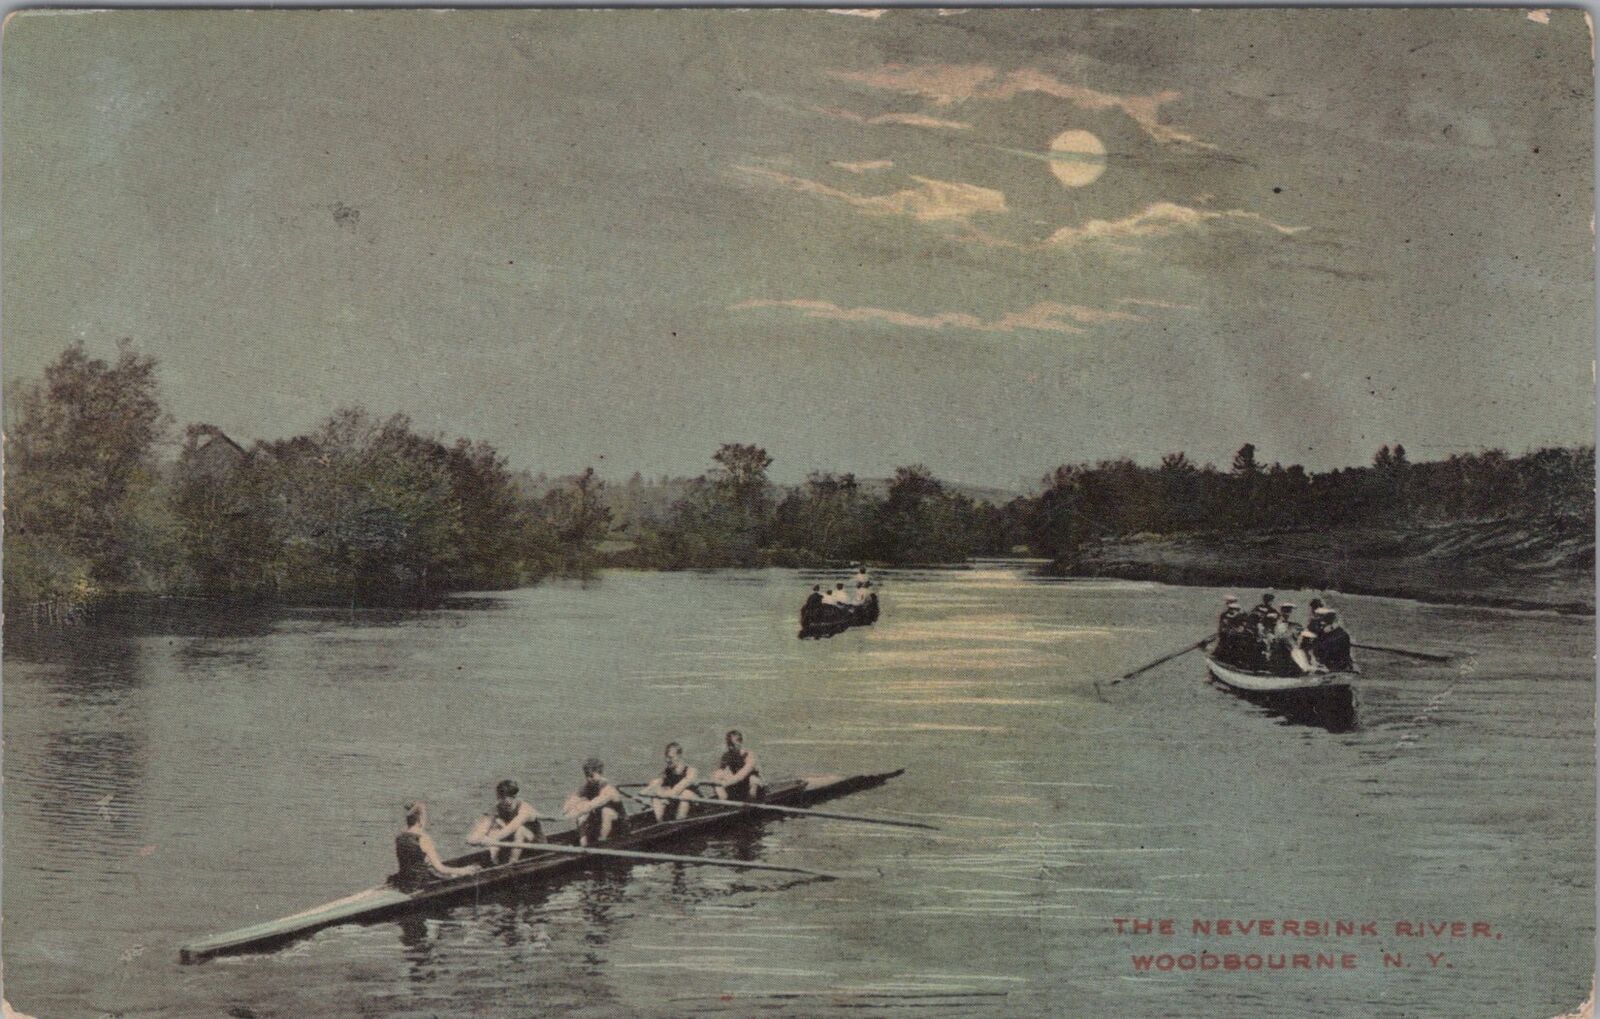 Rowing on Neversink River Boats, Woodbourne New York 1910s Postcard